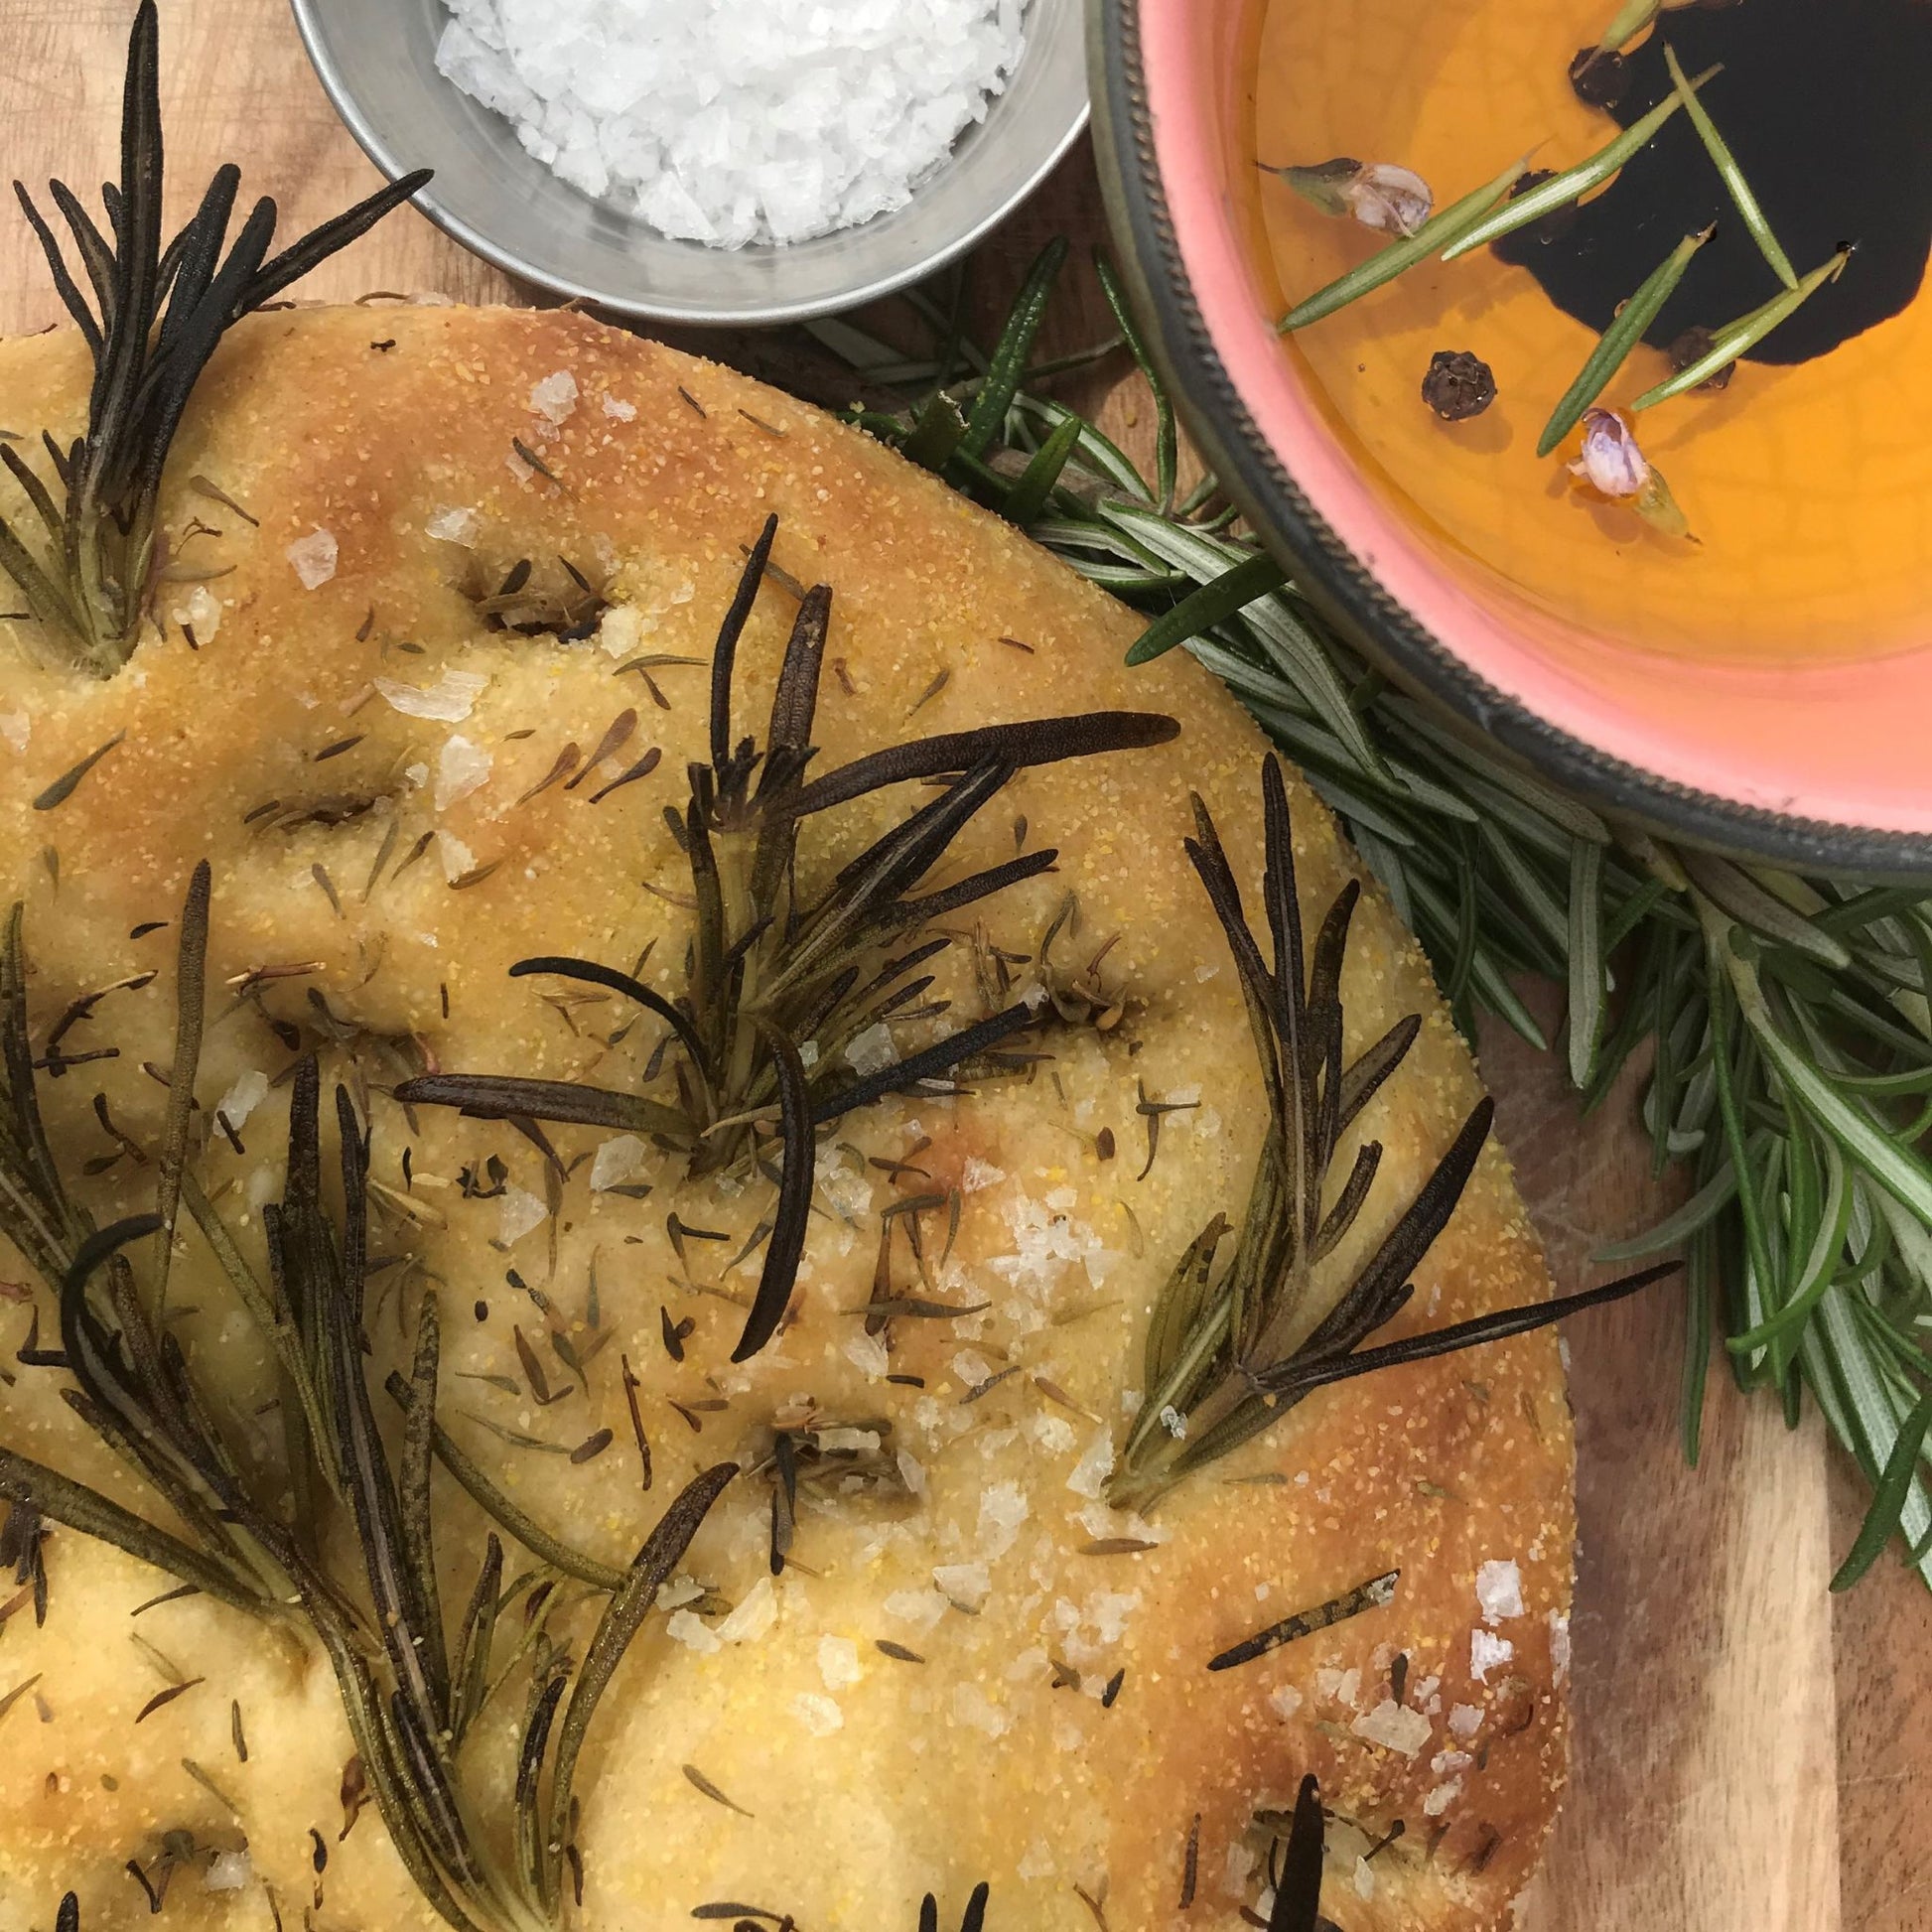 Gluten free focaccia with rosemary, salt and olive oil